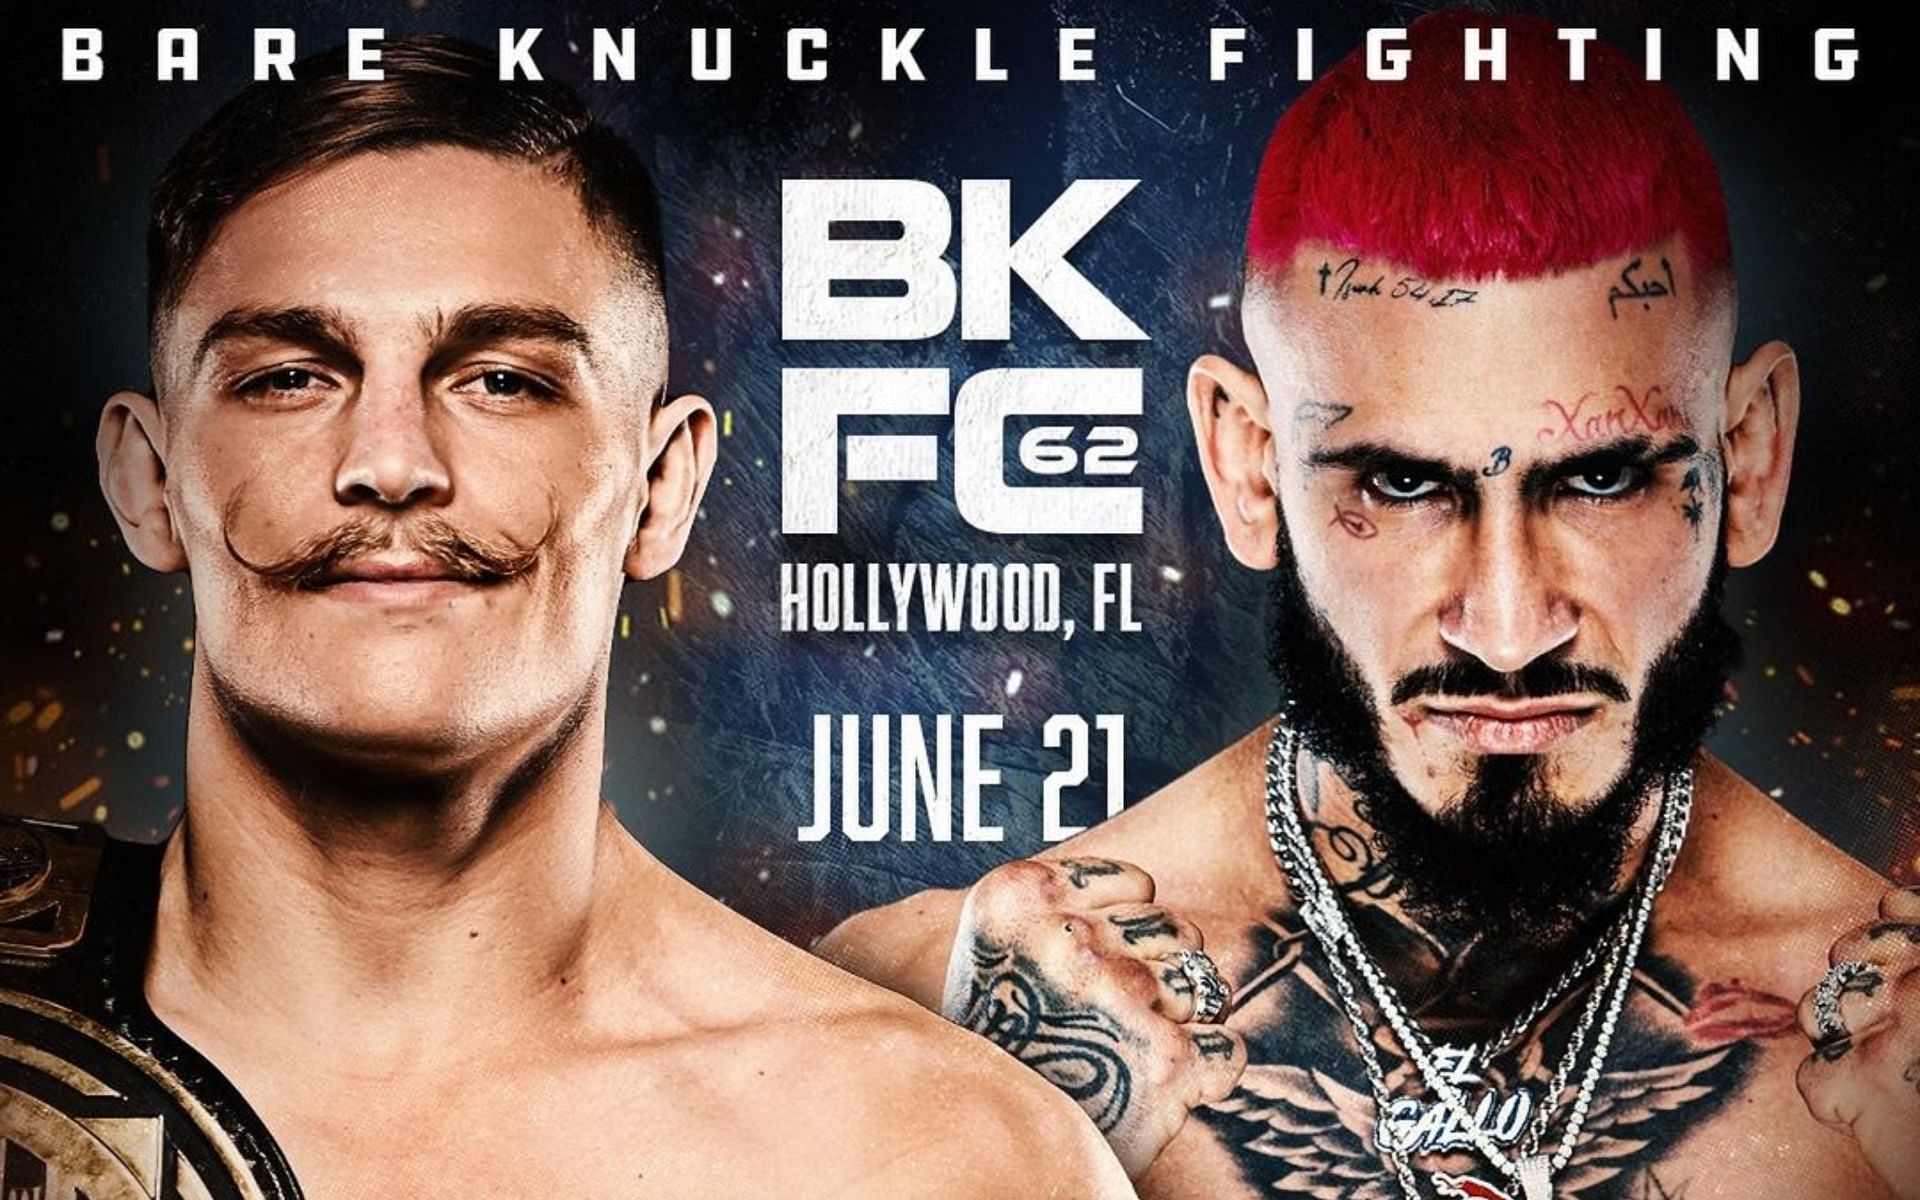 Kai Stewart and Bryan Duran clashed in the main event of BKFC 62